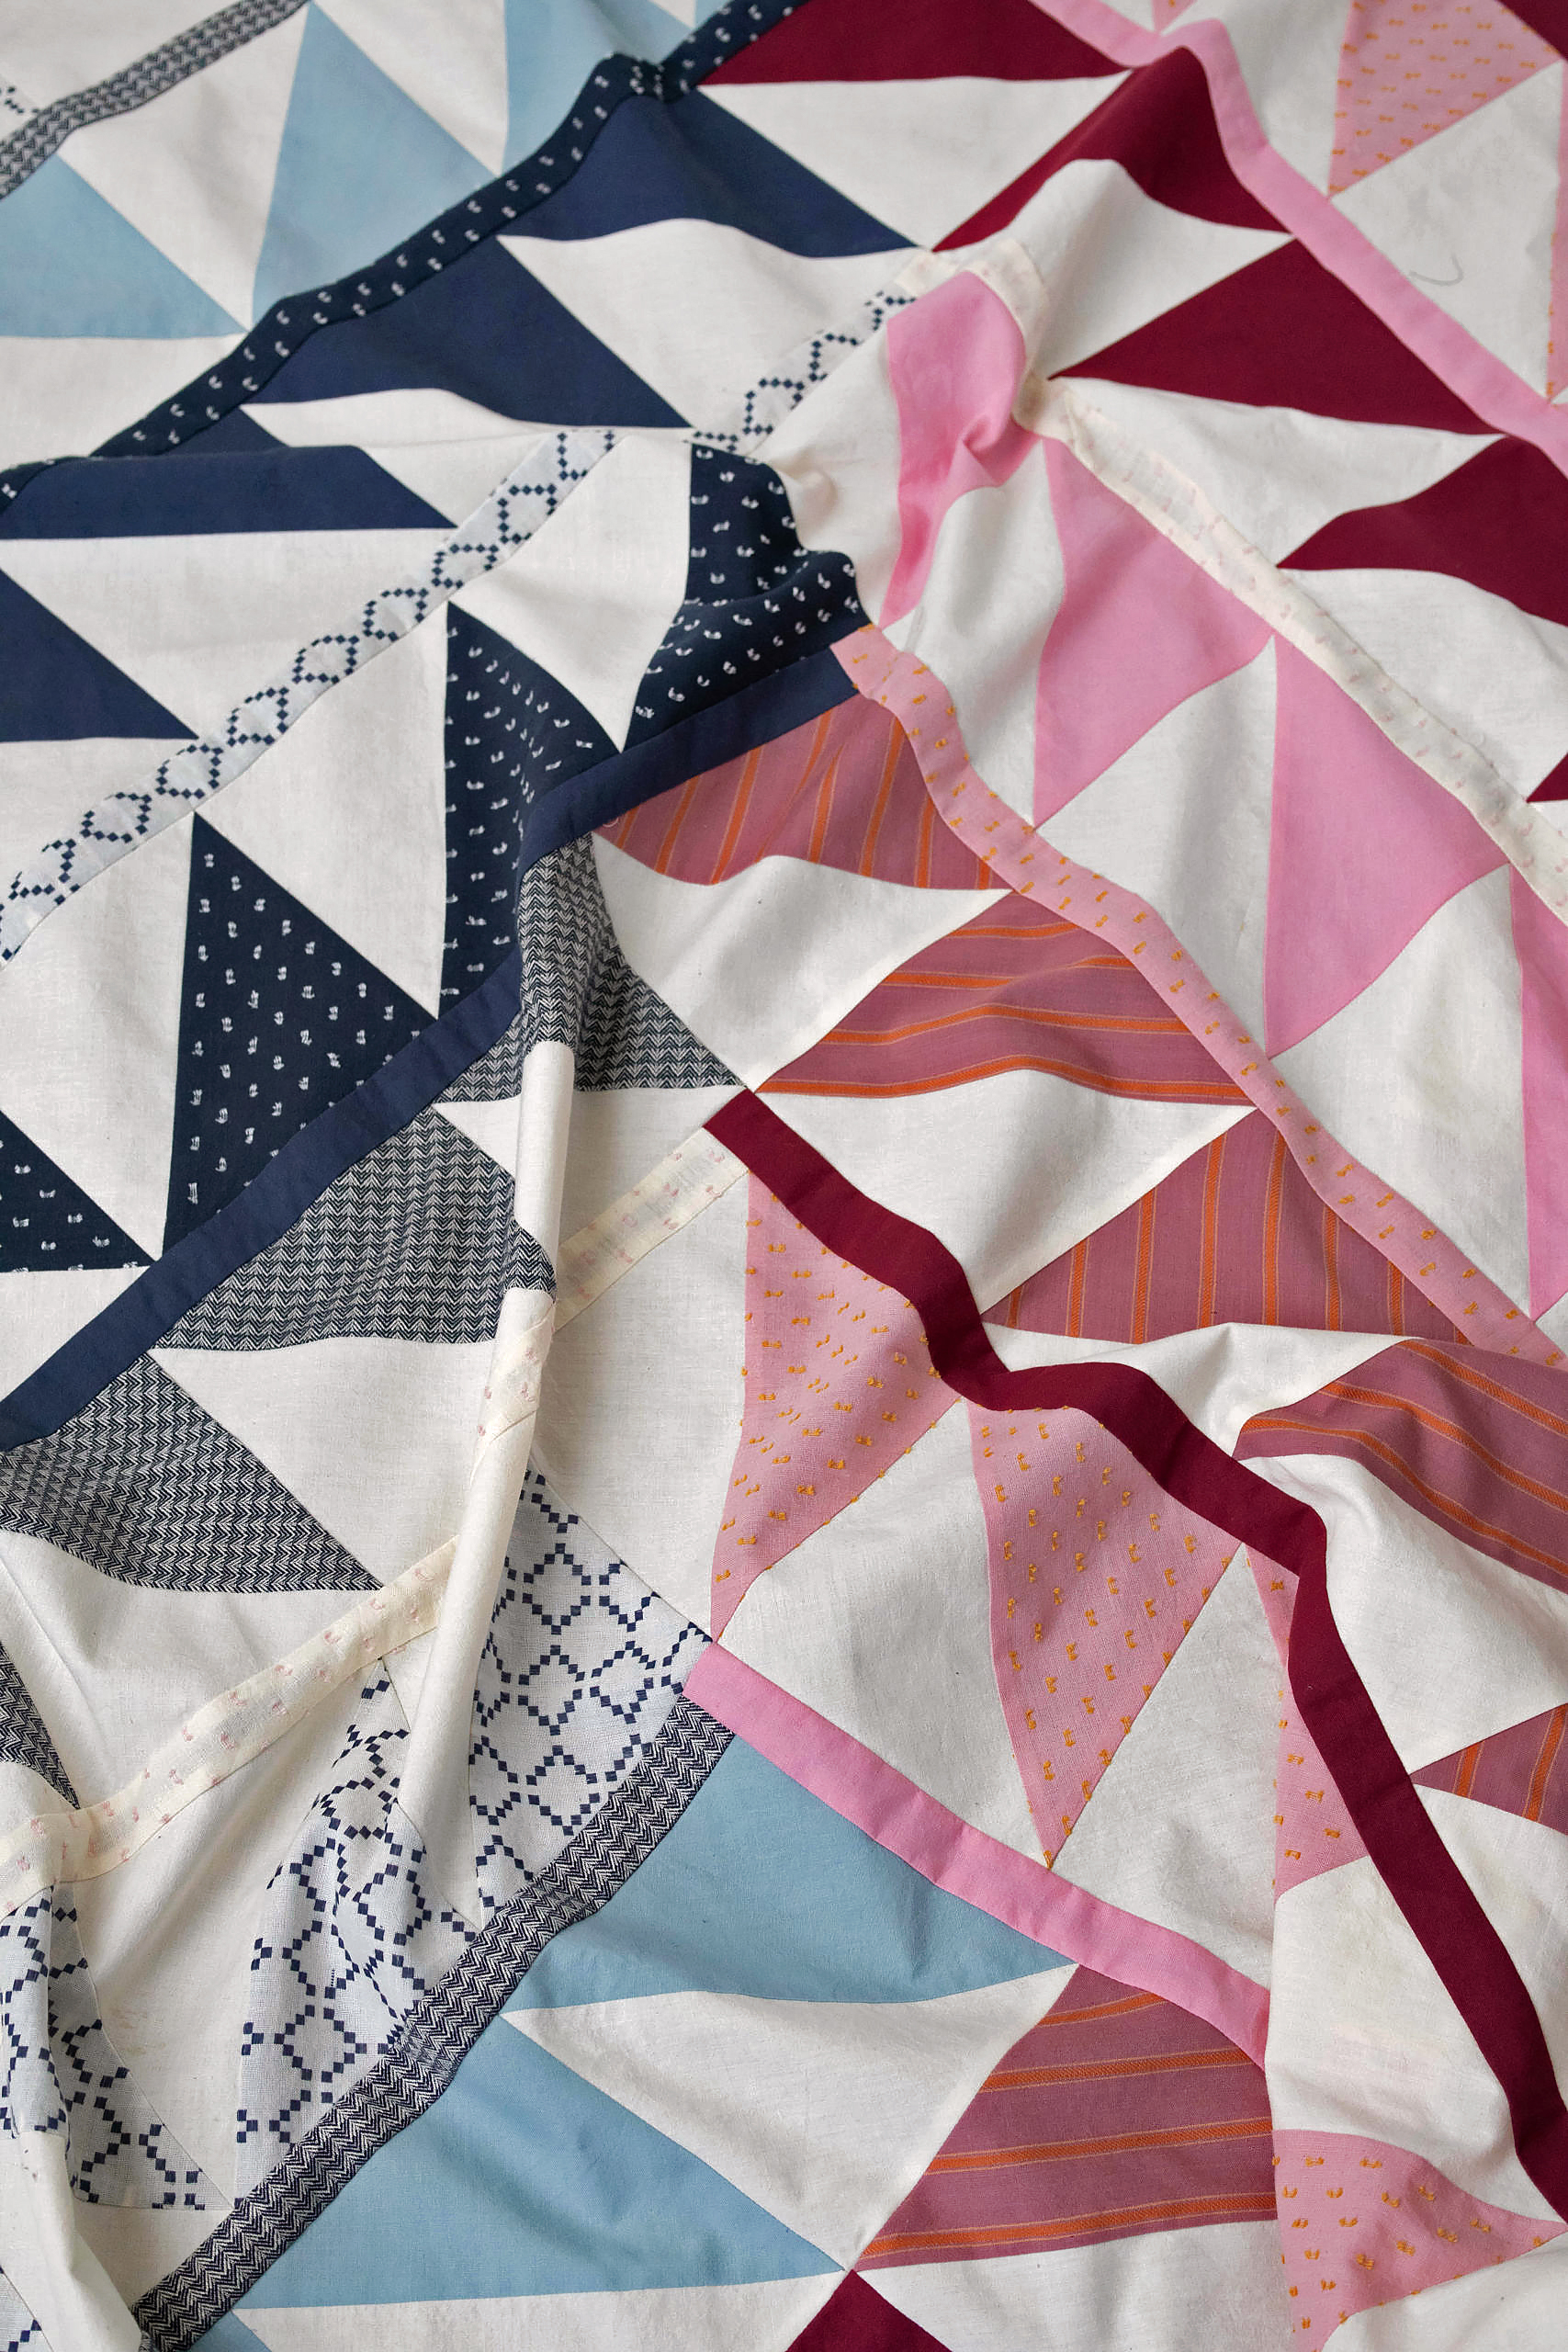 Tackle your quilt works in progress with six simple tips, and use our free download to organize your projects! suzyquilts.com #quilting #sewingdiy